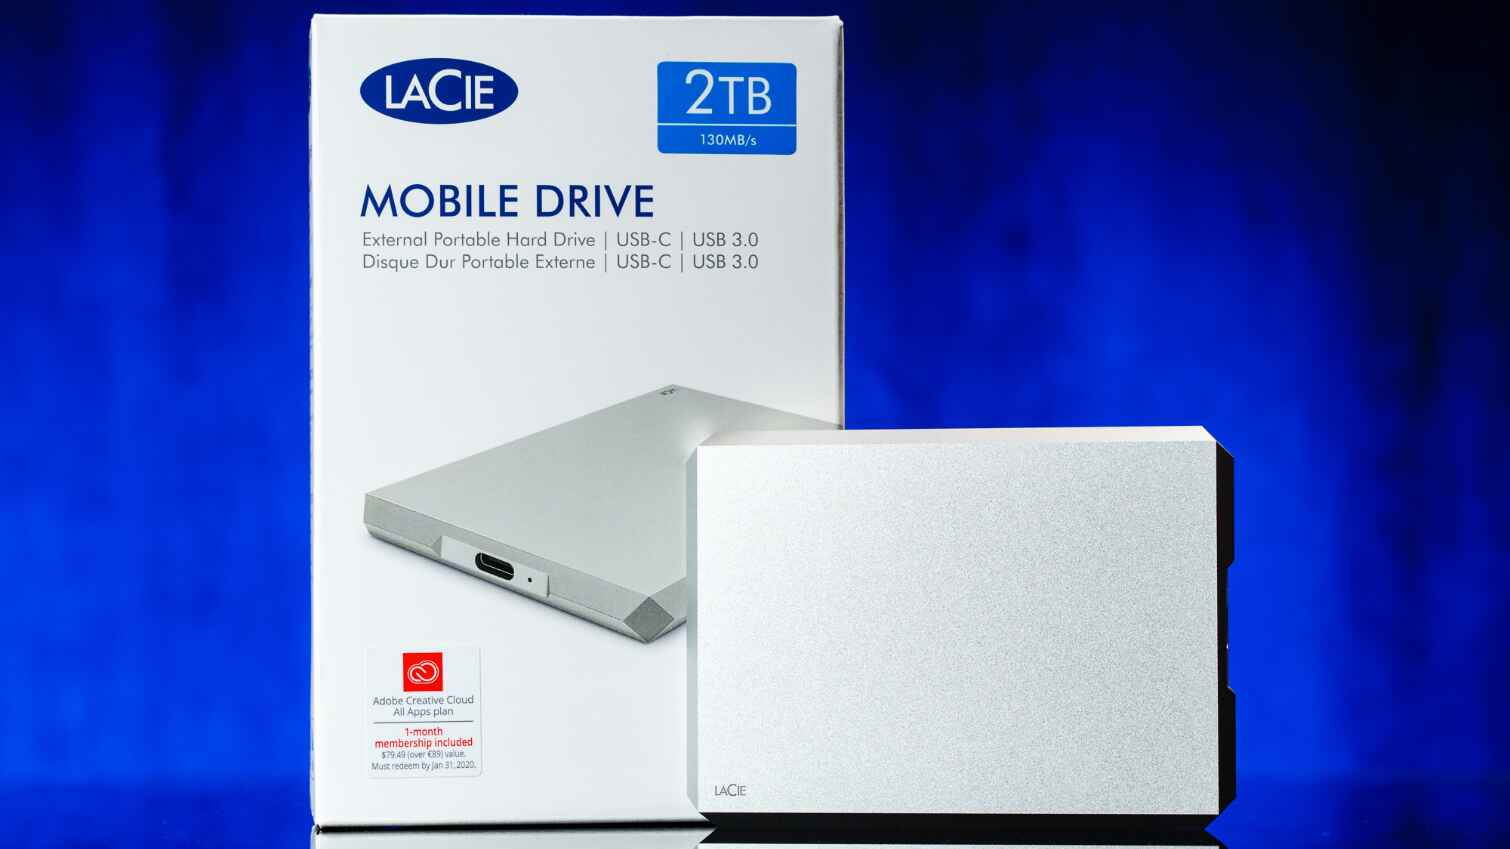 what-is-the-speed-of-the-hard-disk-drive-used-in-the-aluminum-lacie-2tb-usb3-portable-drive